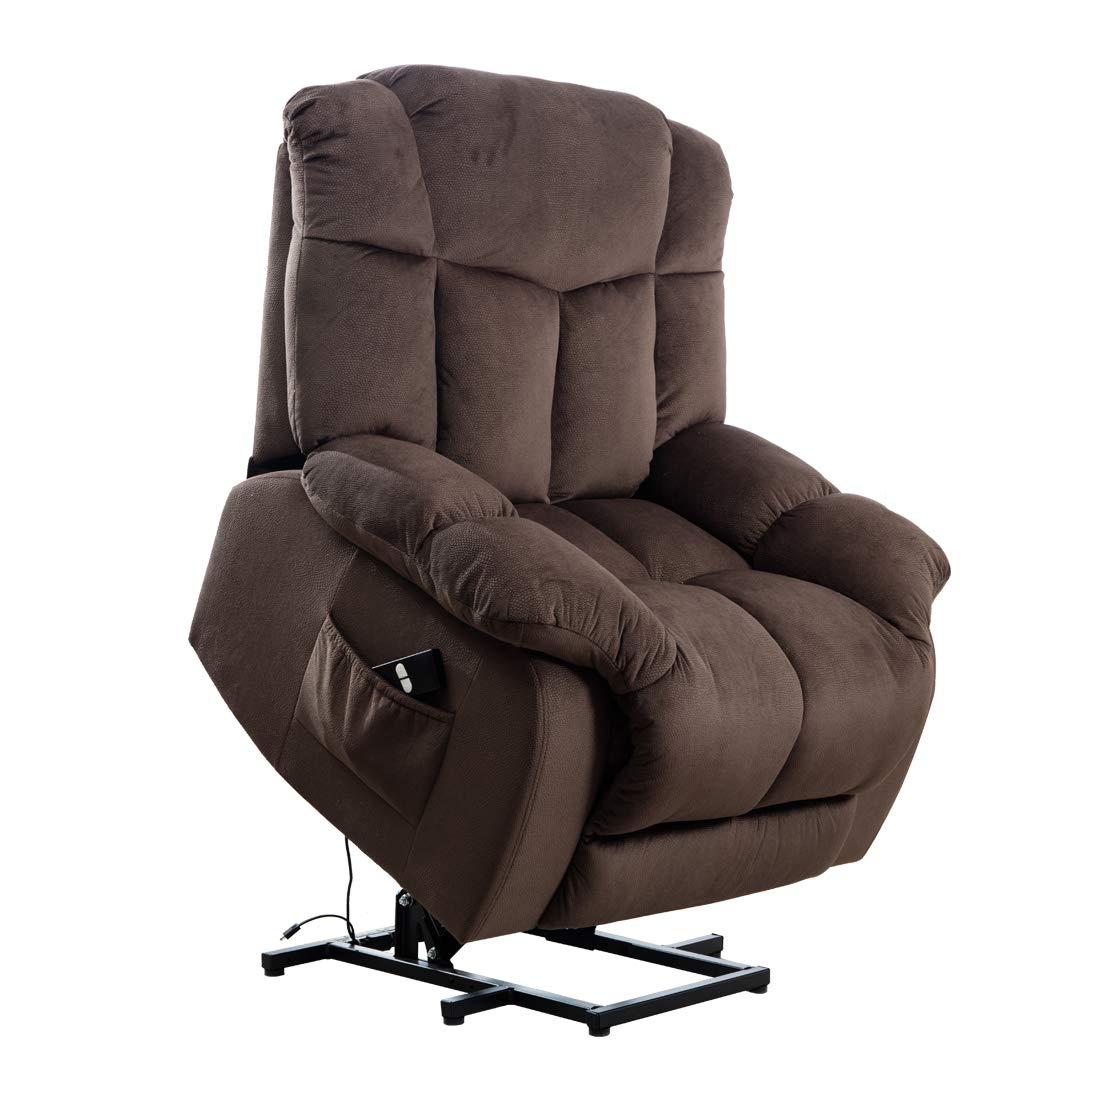 CANMOV Power Lift Recliner Chair (Chocolate)